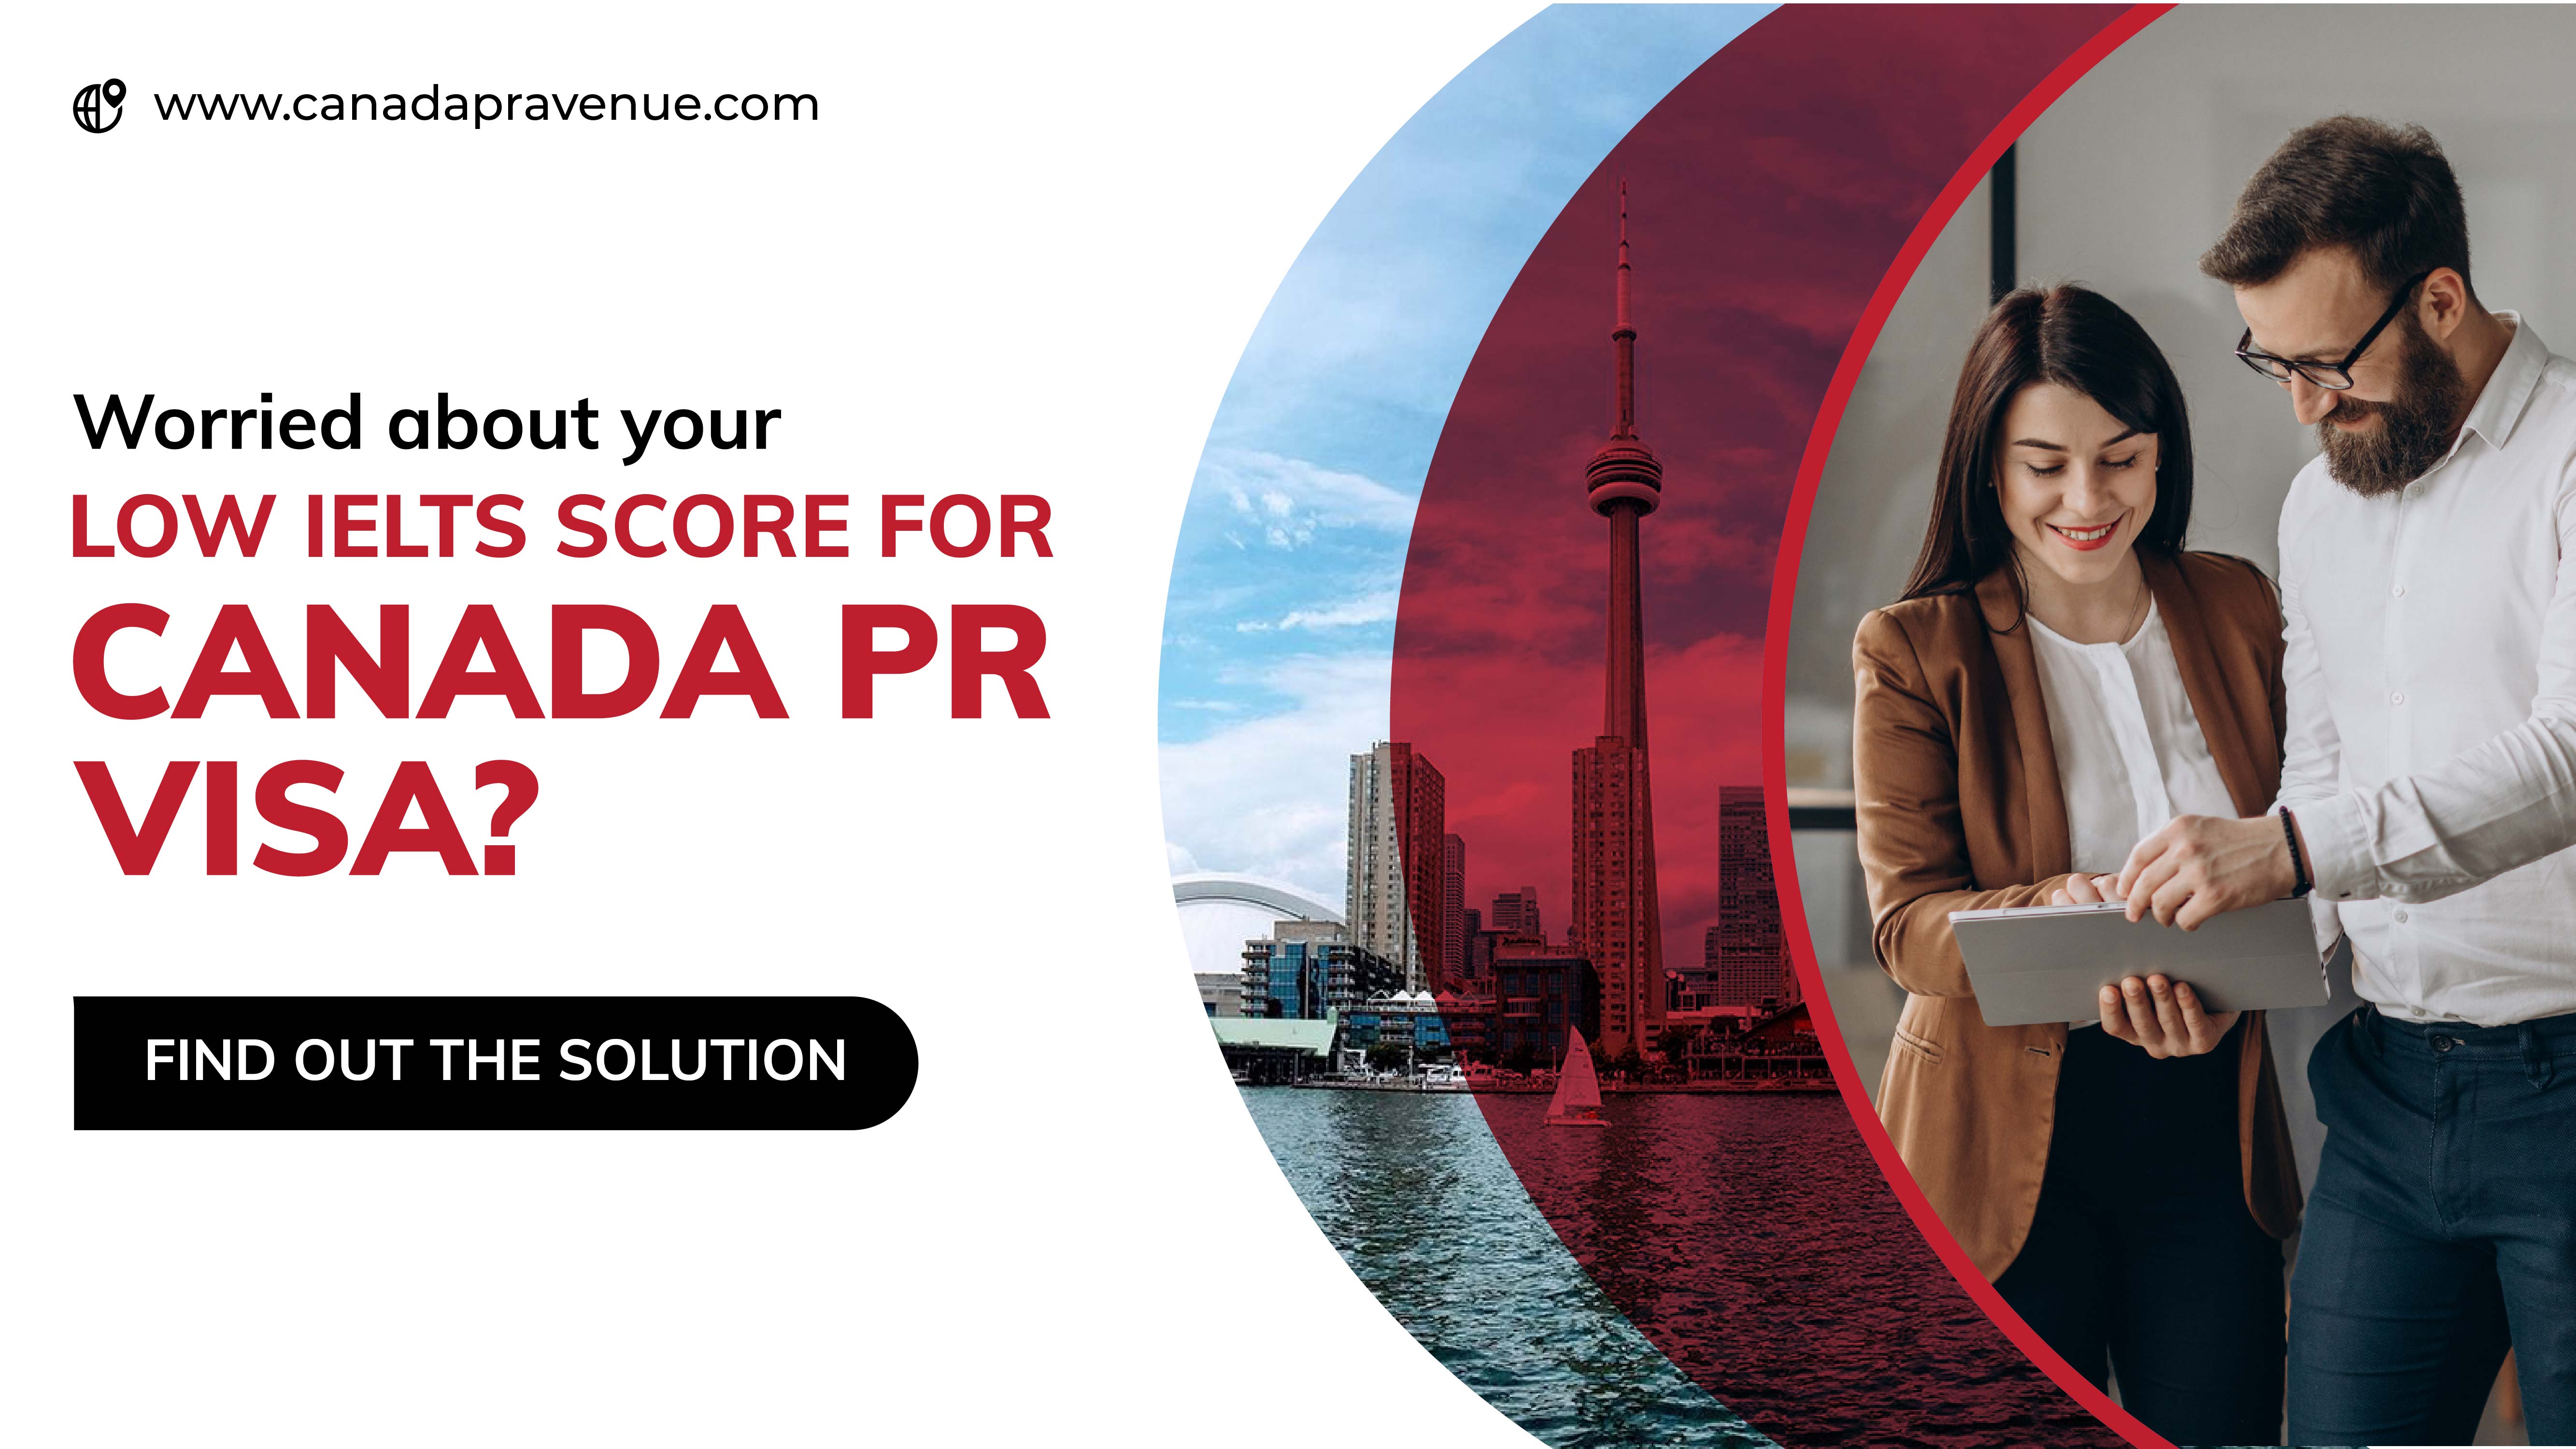 Worried about your Low IELTS Score for Canada PR Visa? Find out the Solution